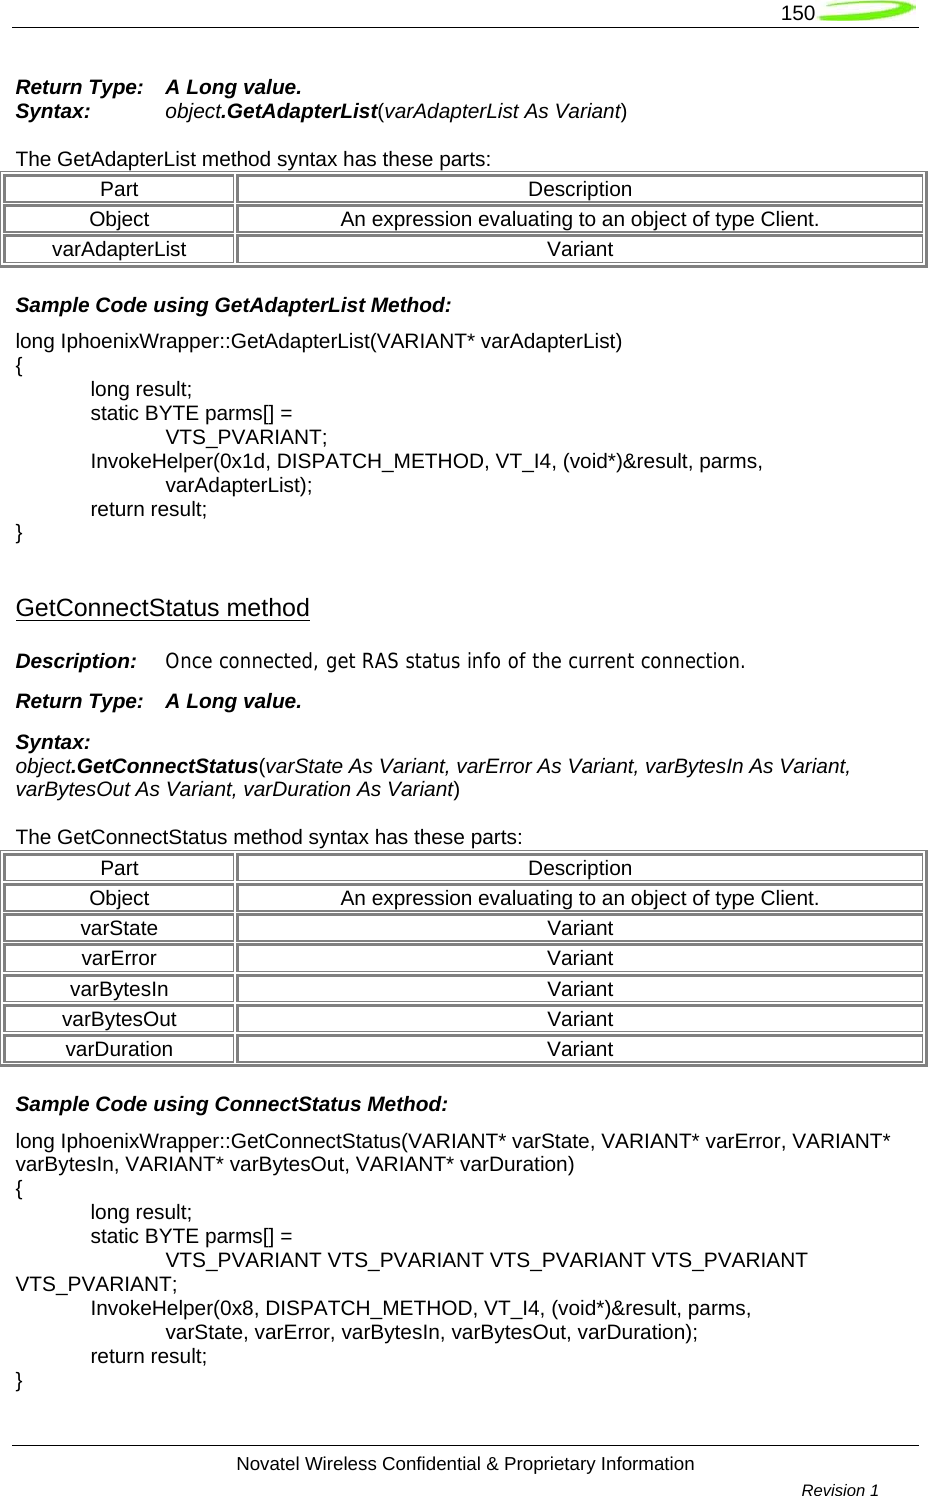   150  Novatel Wireless Confidential &amp; Proprietary Information        Revision 1   Return Type:  A Long value. Syntax:  object.GetAdapterList(varAdapterList As Variant)  The GetAdapterList method syntax has these parts: Part Description Object  An expression evaluating to an object of type Client. varAdapterList Variant Sample Code using GetAdapterList Method: long IphoenixWrapper::GetAdapterList(VARIANT* varAdapterList) {  long result;   static BYTE parms[] =   VTS_PVARIANT;  InvokeHelper(0x1d, DISPATCH_METHOD, VT_I4, (void*)&amp;result, parms,   varAdapterList);  return result; }  GetConnectStatus method Description:  Once connected, get RAS status info of the current connection. Return Type:  A Long value. Syntax: object.GetConnectStatus(varState As Variant, varError As Variant, varBytesIn As Variant, varBytesOut As Variant, varDuration As Variant)  The GetConnectStatus method syntax has these parts: Part Description Object  An expression evaluating to an object of type Client. varState Variant varError Variant varBytesIn Variant varBytesOut Variant varDuration Variant Sample Code using ConnectStatus Method: long IphoenixWrapper::GetConnectStatus(VARIANT* varState, VARIANT* varError, VARIANT* varBytesIn, VARIANT* varBytesOut, VARIANT* varDuration) {  long result;   static BYTE parms[] =   VTS_PVARIANT VTS_PVARIANT VTS_PVARIANT VTS_PVARIANT VTS_PVARIANT;  InvokeHelper(0x8, DISPATCH_METHOD, VT_I4, (void*)&amp;result, parms,   varState, varError, varBytesIn, varBytesOut, varDuration);  return result; } 